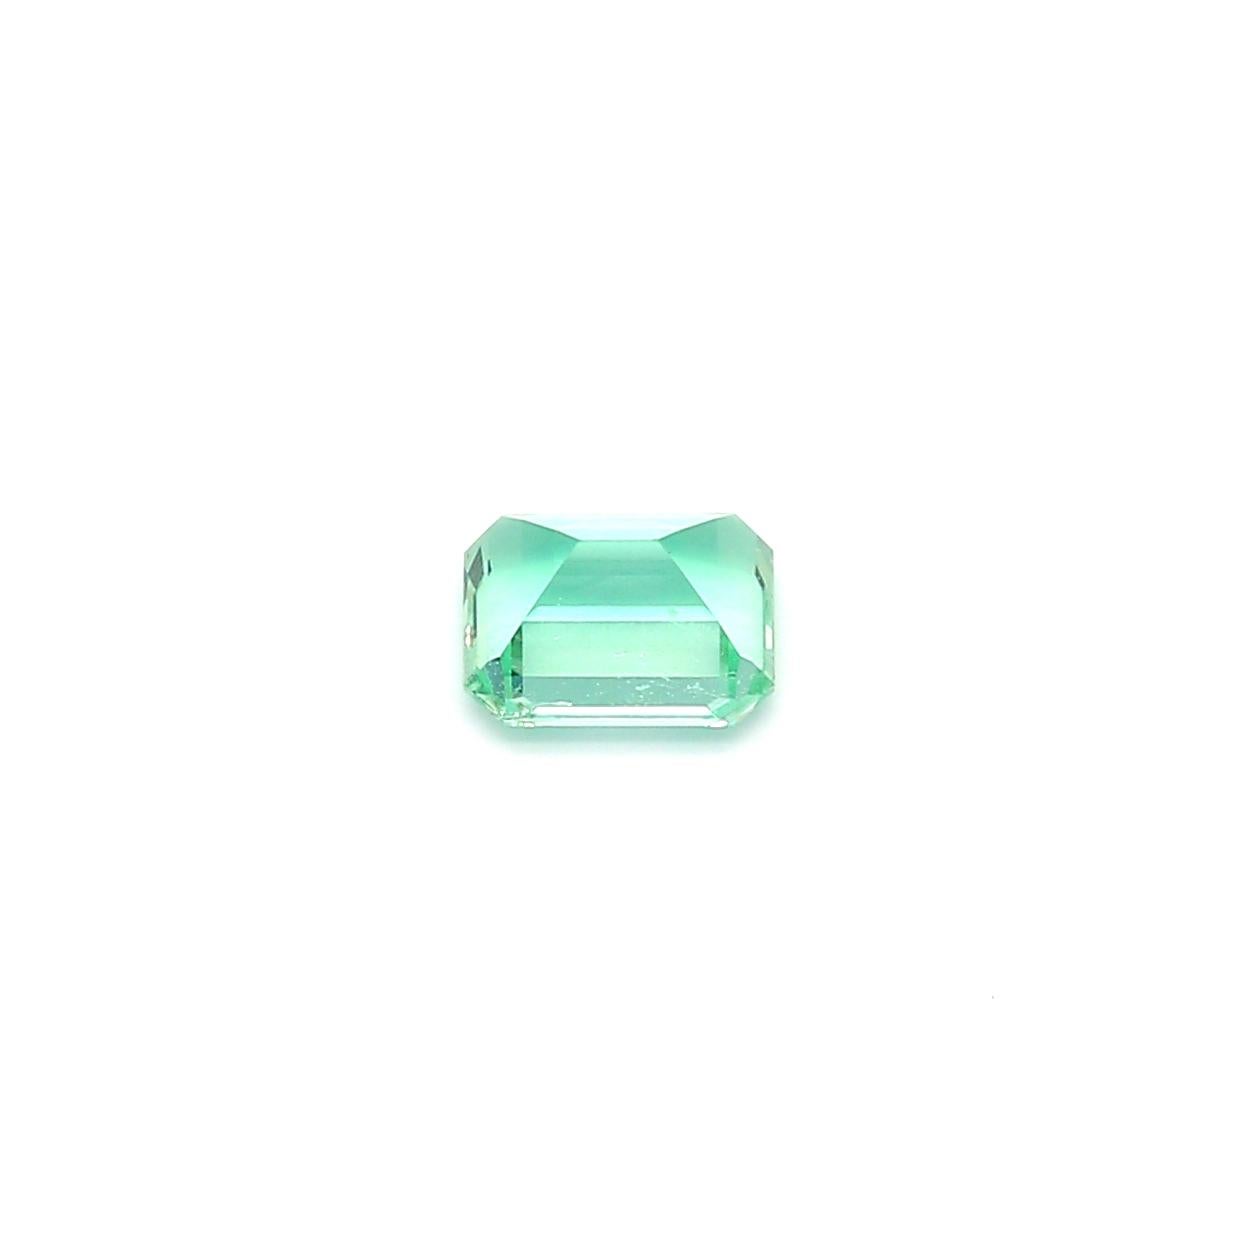 An amazing Russian Emerald which allows jewelers to create a unique piece of wearable art.
This exceptional quality gemstone would make a custom-made jewelry design. Perfect for a Ring or Pendant.

Shape - Octagon
Weight - 0.53 ct
Treatment - 